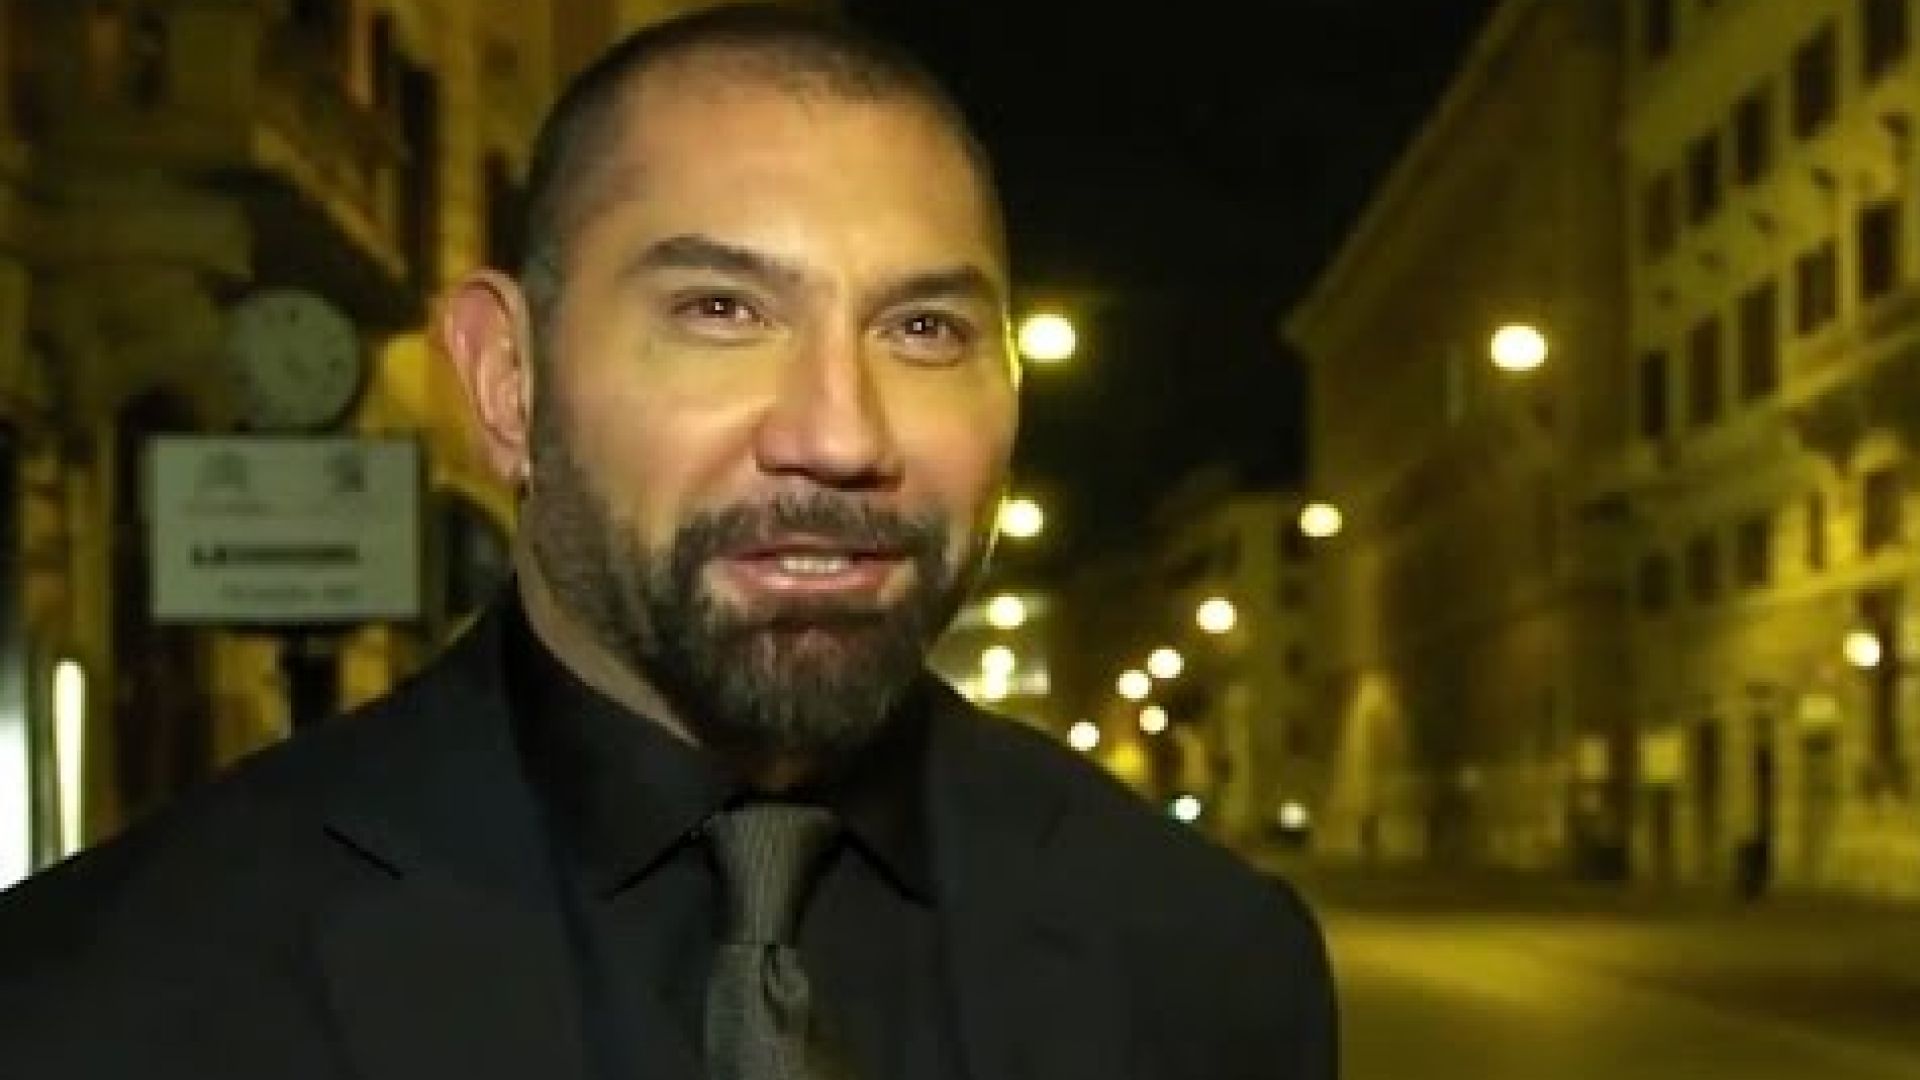 Supercars and Dave Bautista in New &#039;Spectre&#039; Featurette